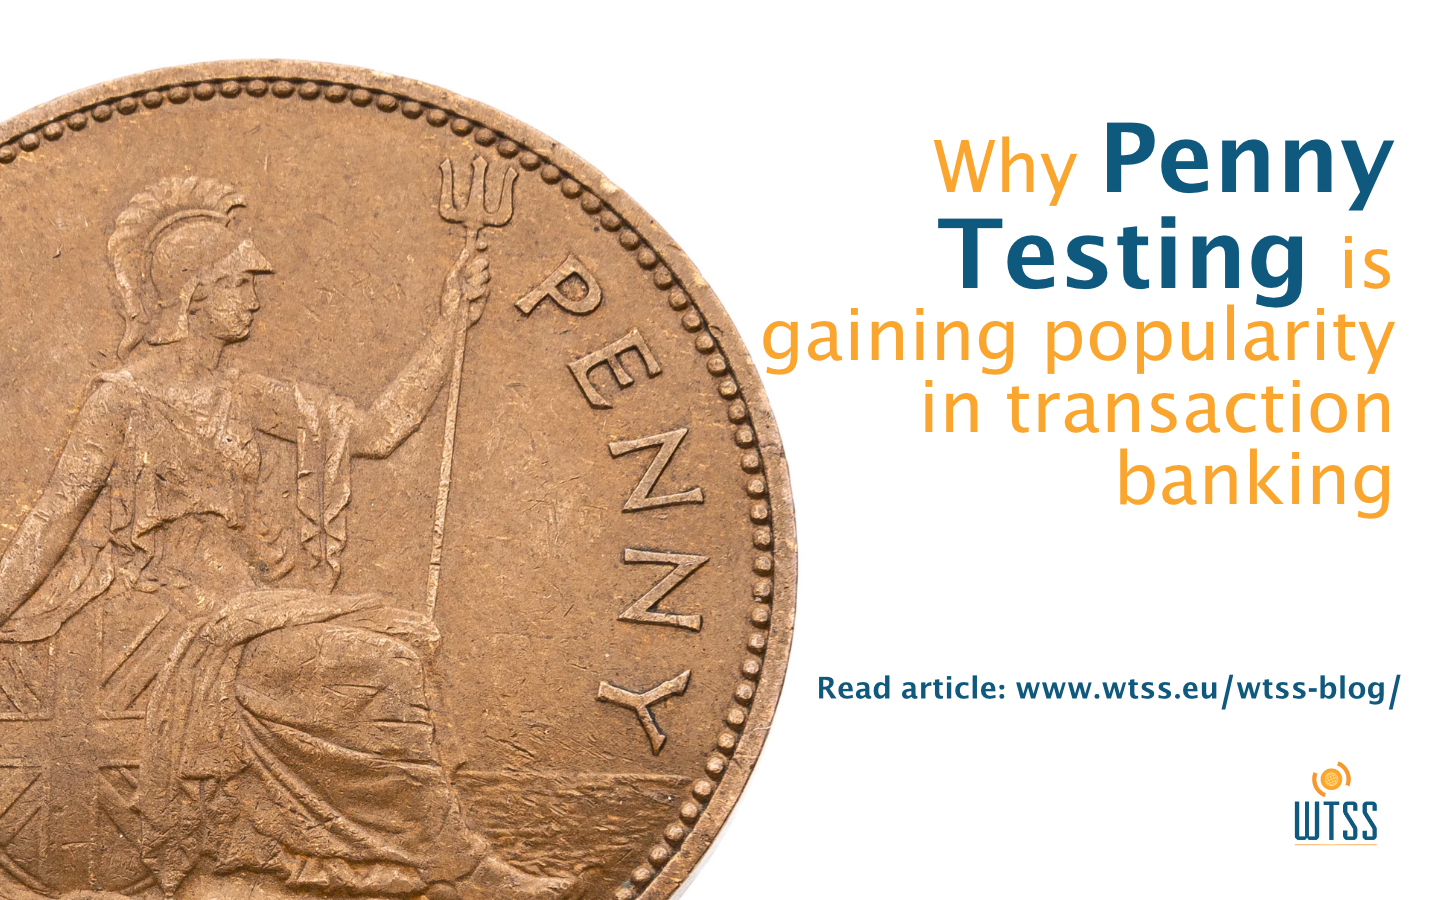 Penny testing in transaction banking